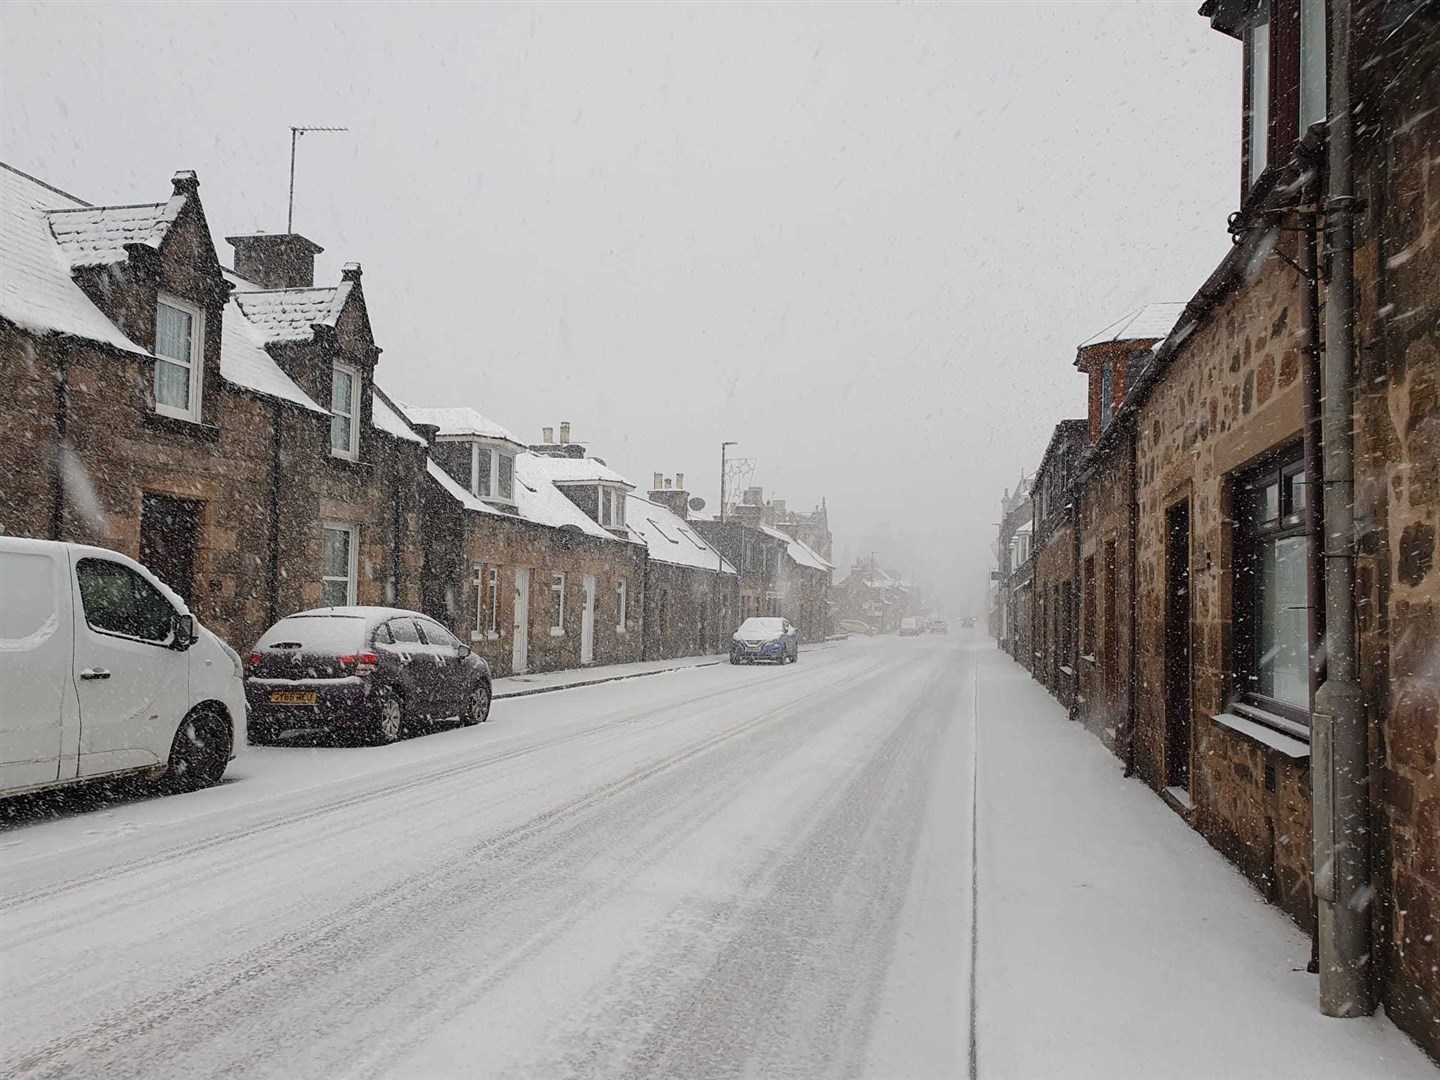 Visibility was poor on Rothes' New Street on Tuesday morning.